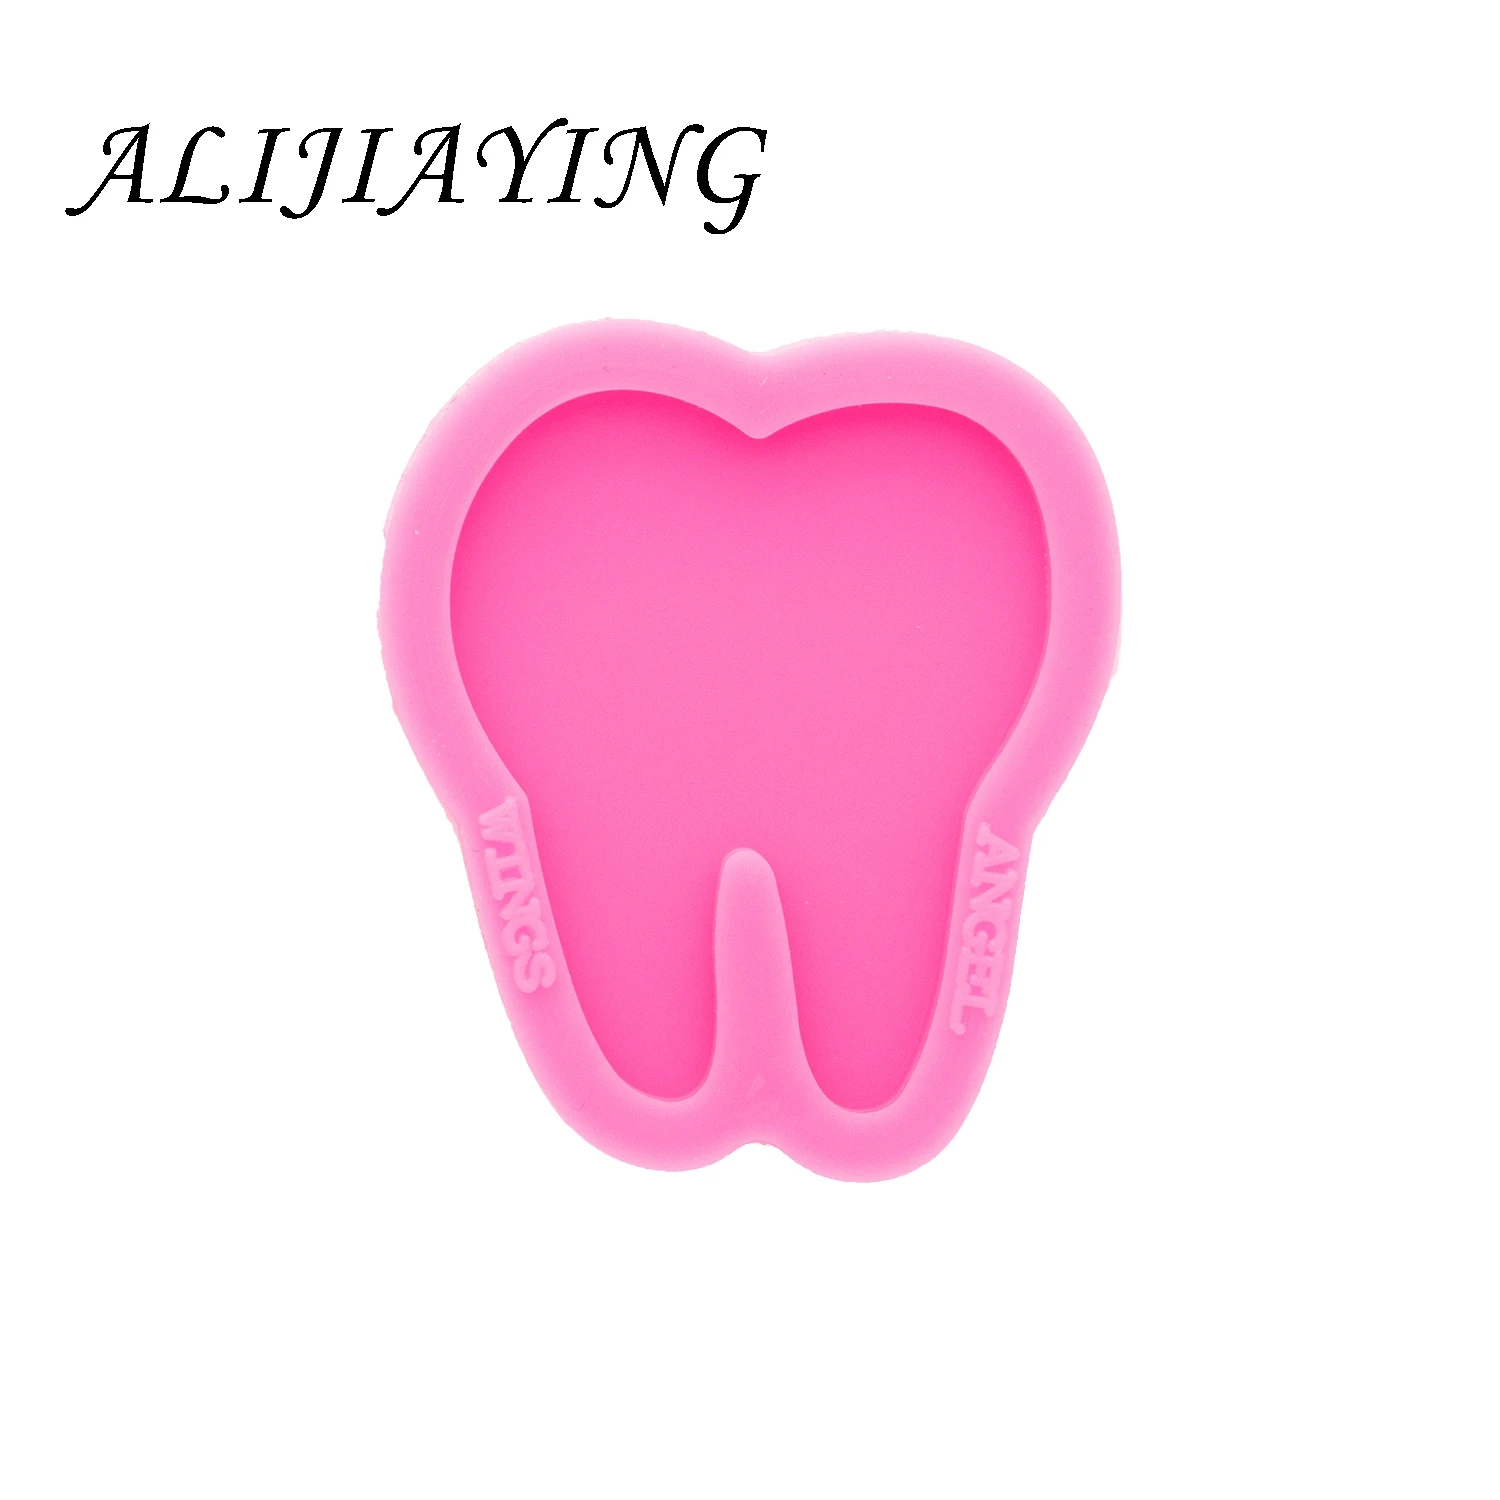 https://ae01.alicdn.com/kf/H2fca8c69b9754ea48423636eba3f77abe/Shine-Inside-Tooth-Resin-Badge-Reel-Mold-Silicone-Moulds-DIY-Forfits-on-A-1-5-Inch.jpg